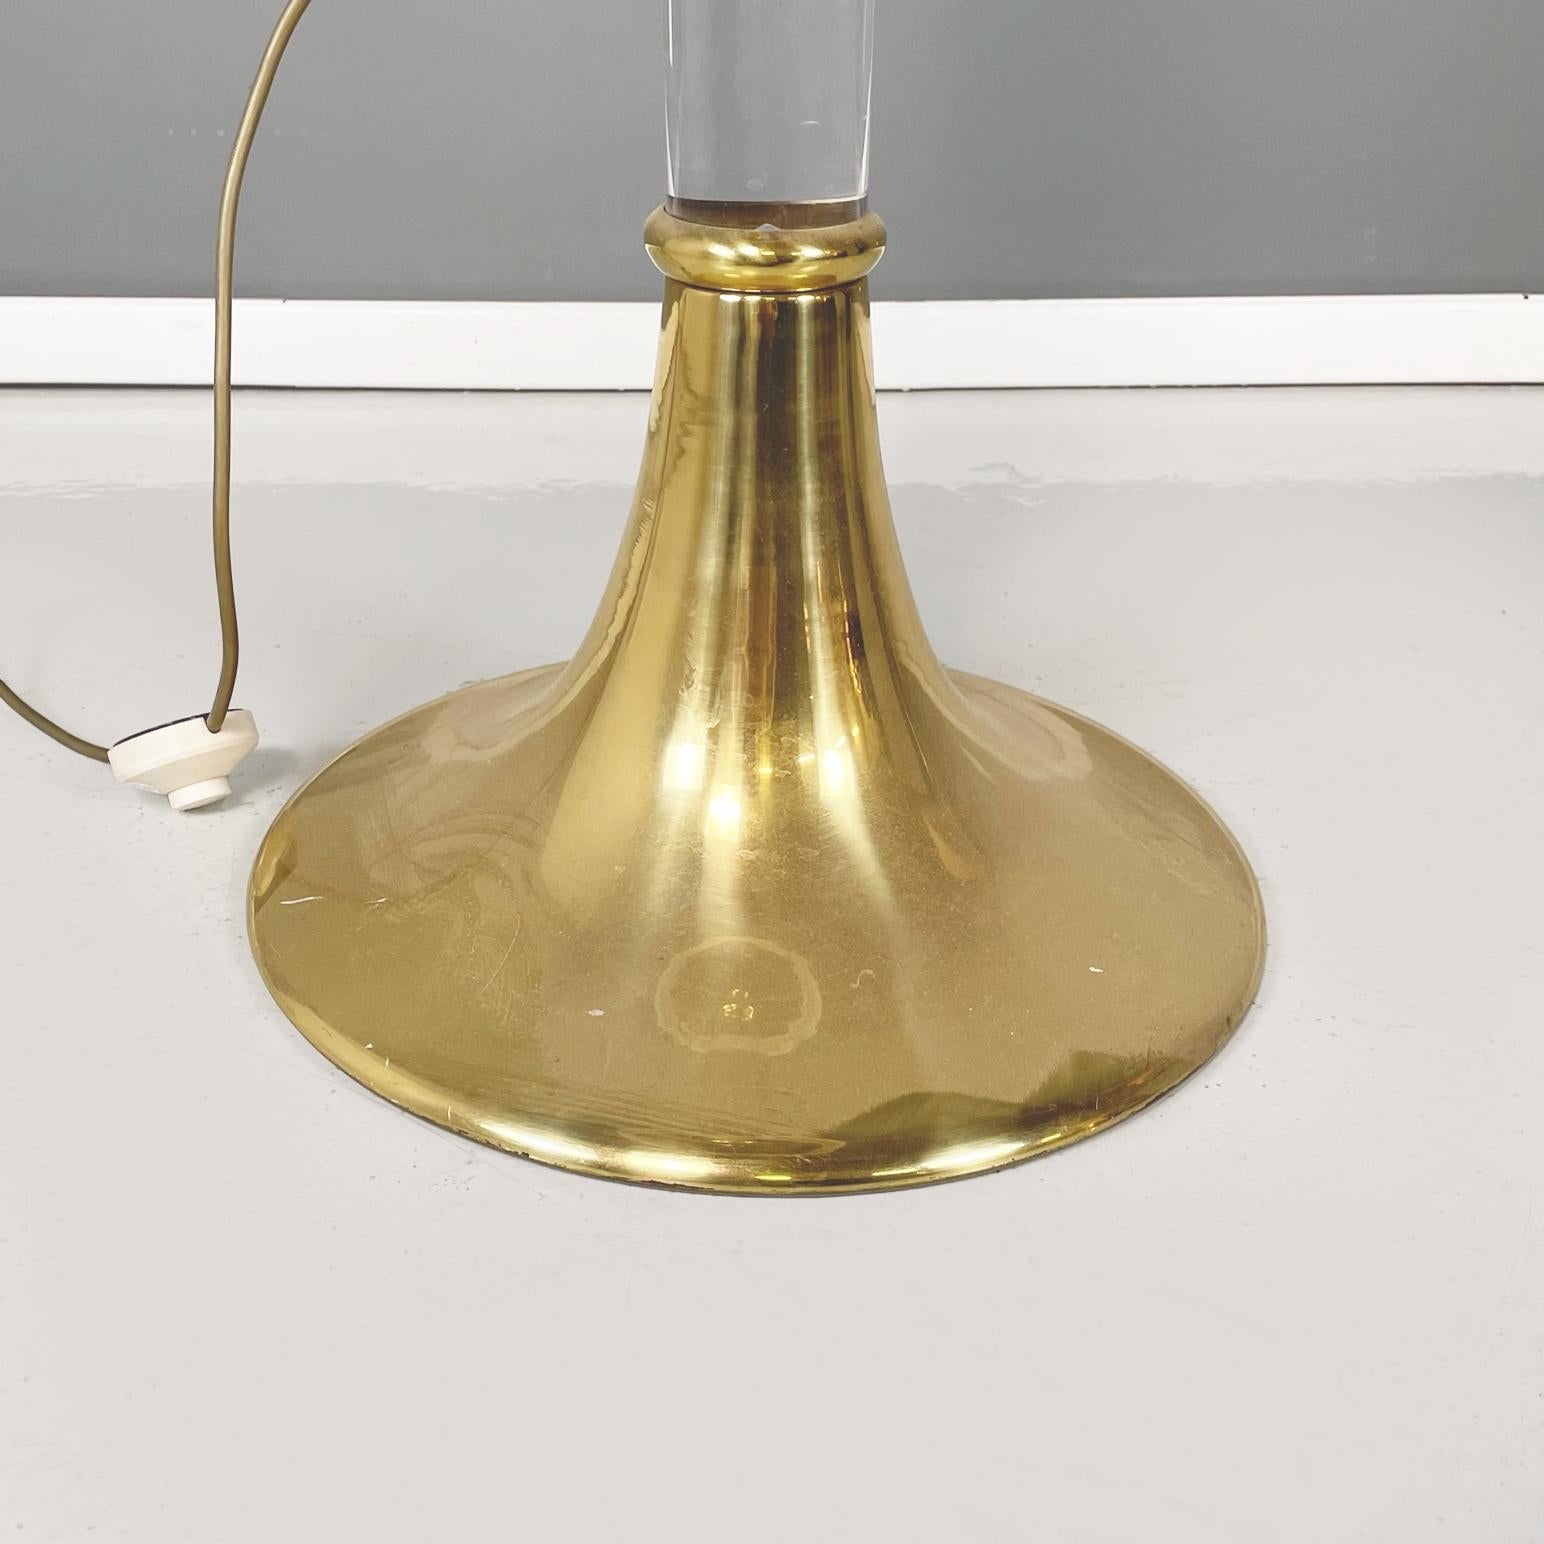 Italian Modern Floor Lamp in White Fabric Lampshade, Plexiglass and Brass, 1980s For Sale 7